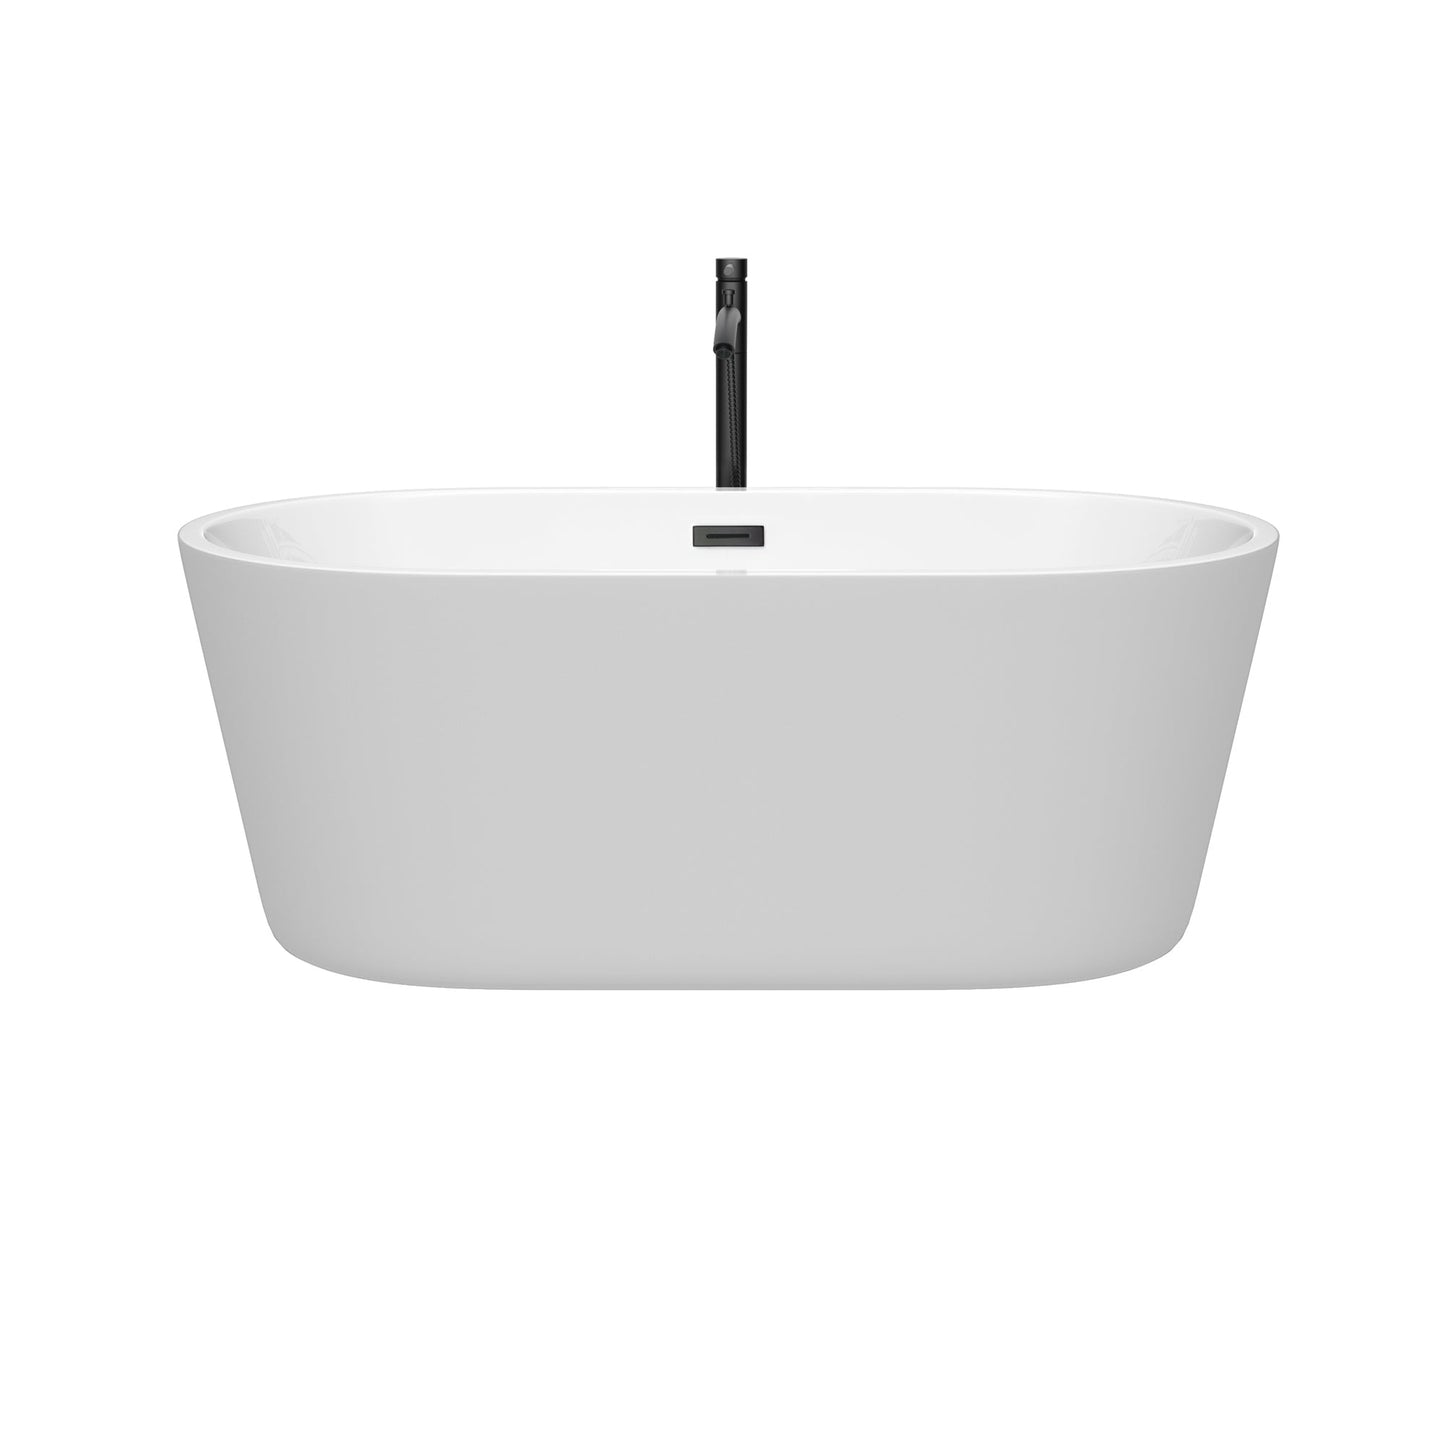 Wyndham Collection Carissa 60" Freestanding Bathtub in White With Floor Mounted Faucet, Drain and Overflow Trim in Matte Black